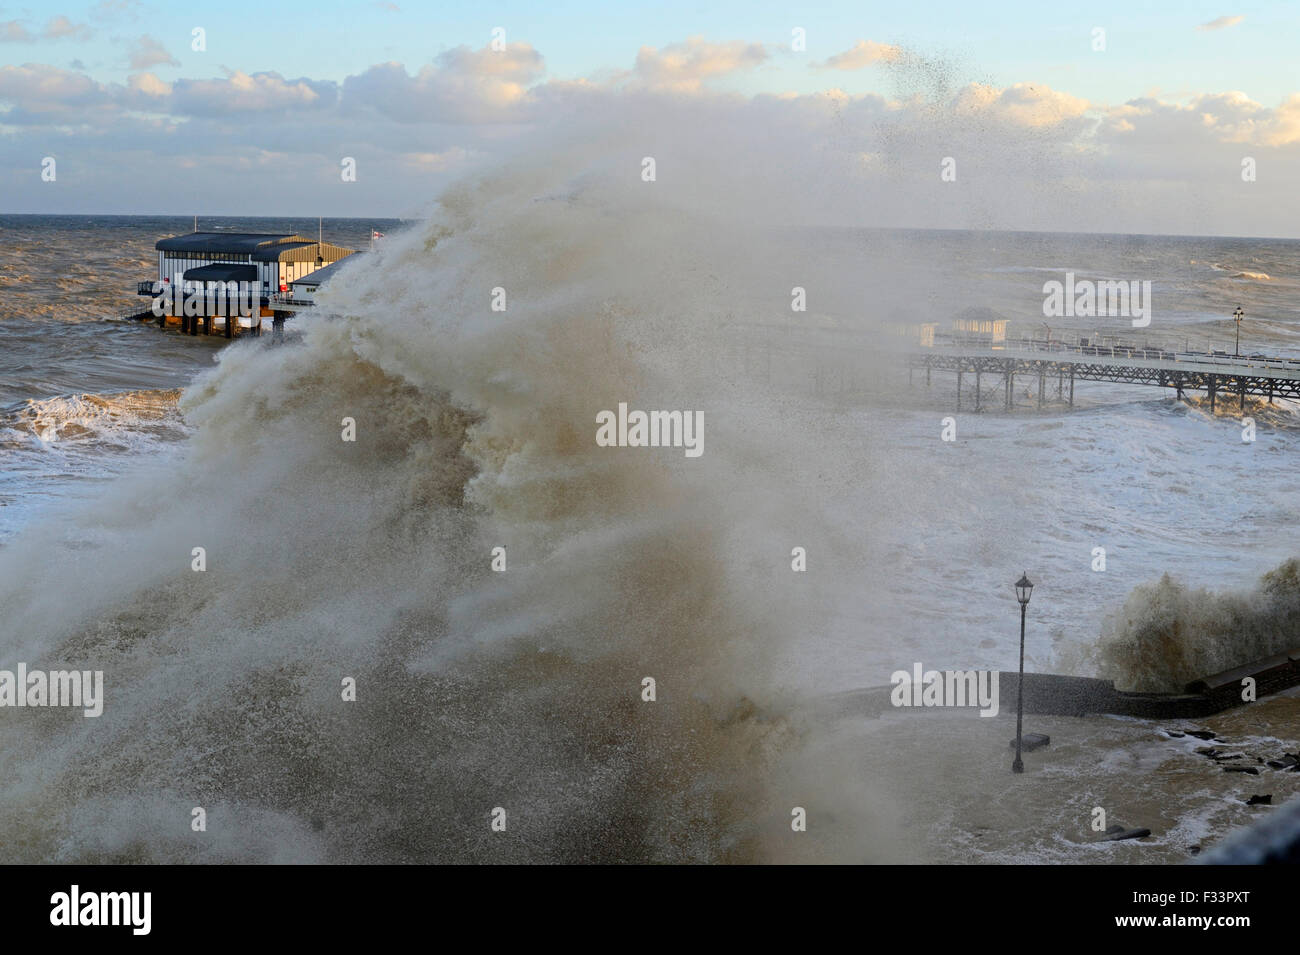 High waves lashing Cromer seafront and Pier Norfolk during Storm surge Dec 2013 Stock Photo